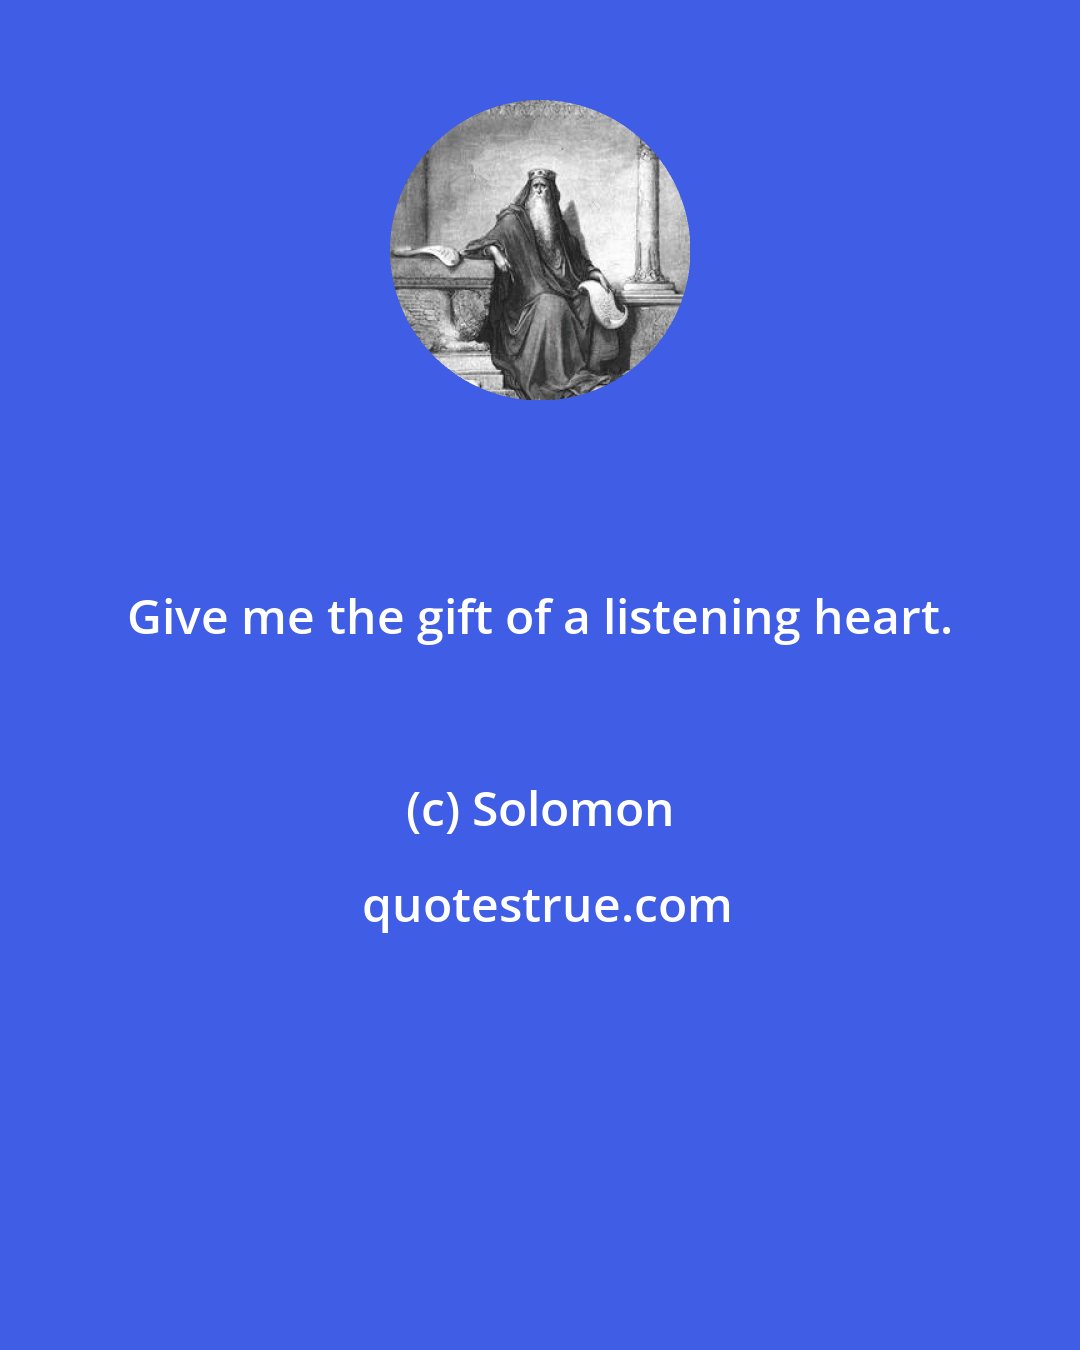 Solomon: Give me the gift of a listening heart.